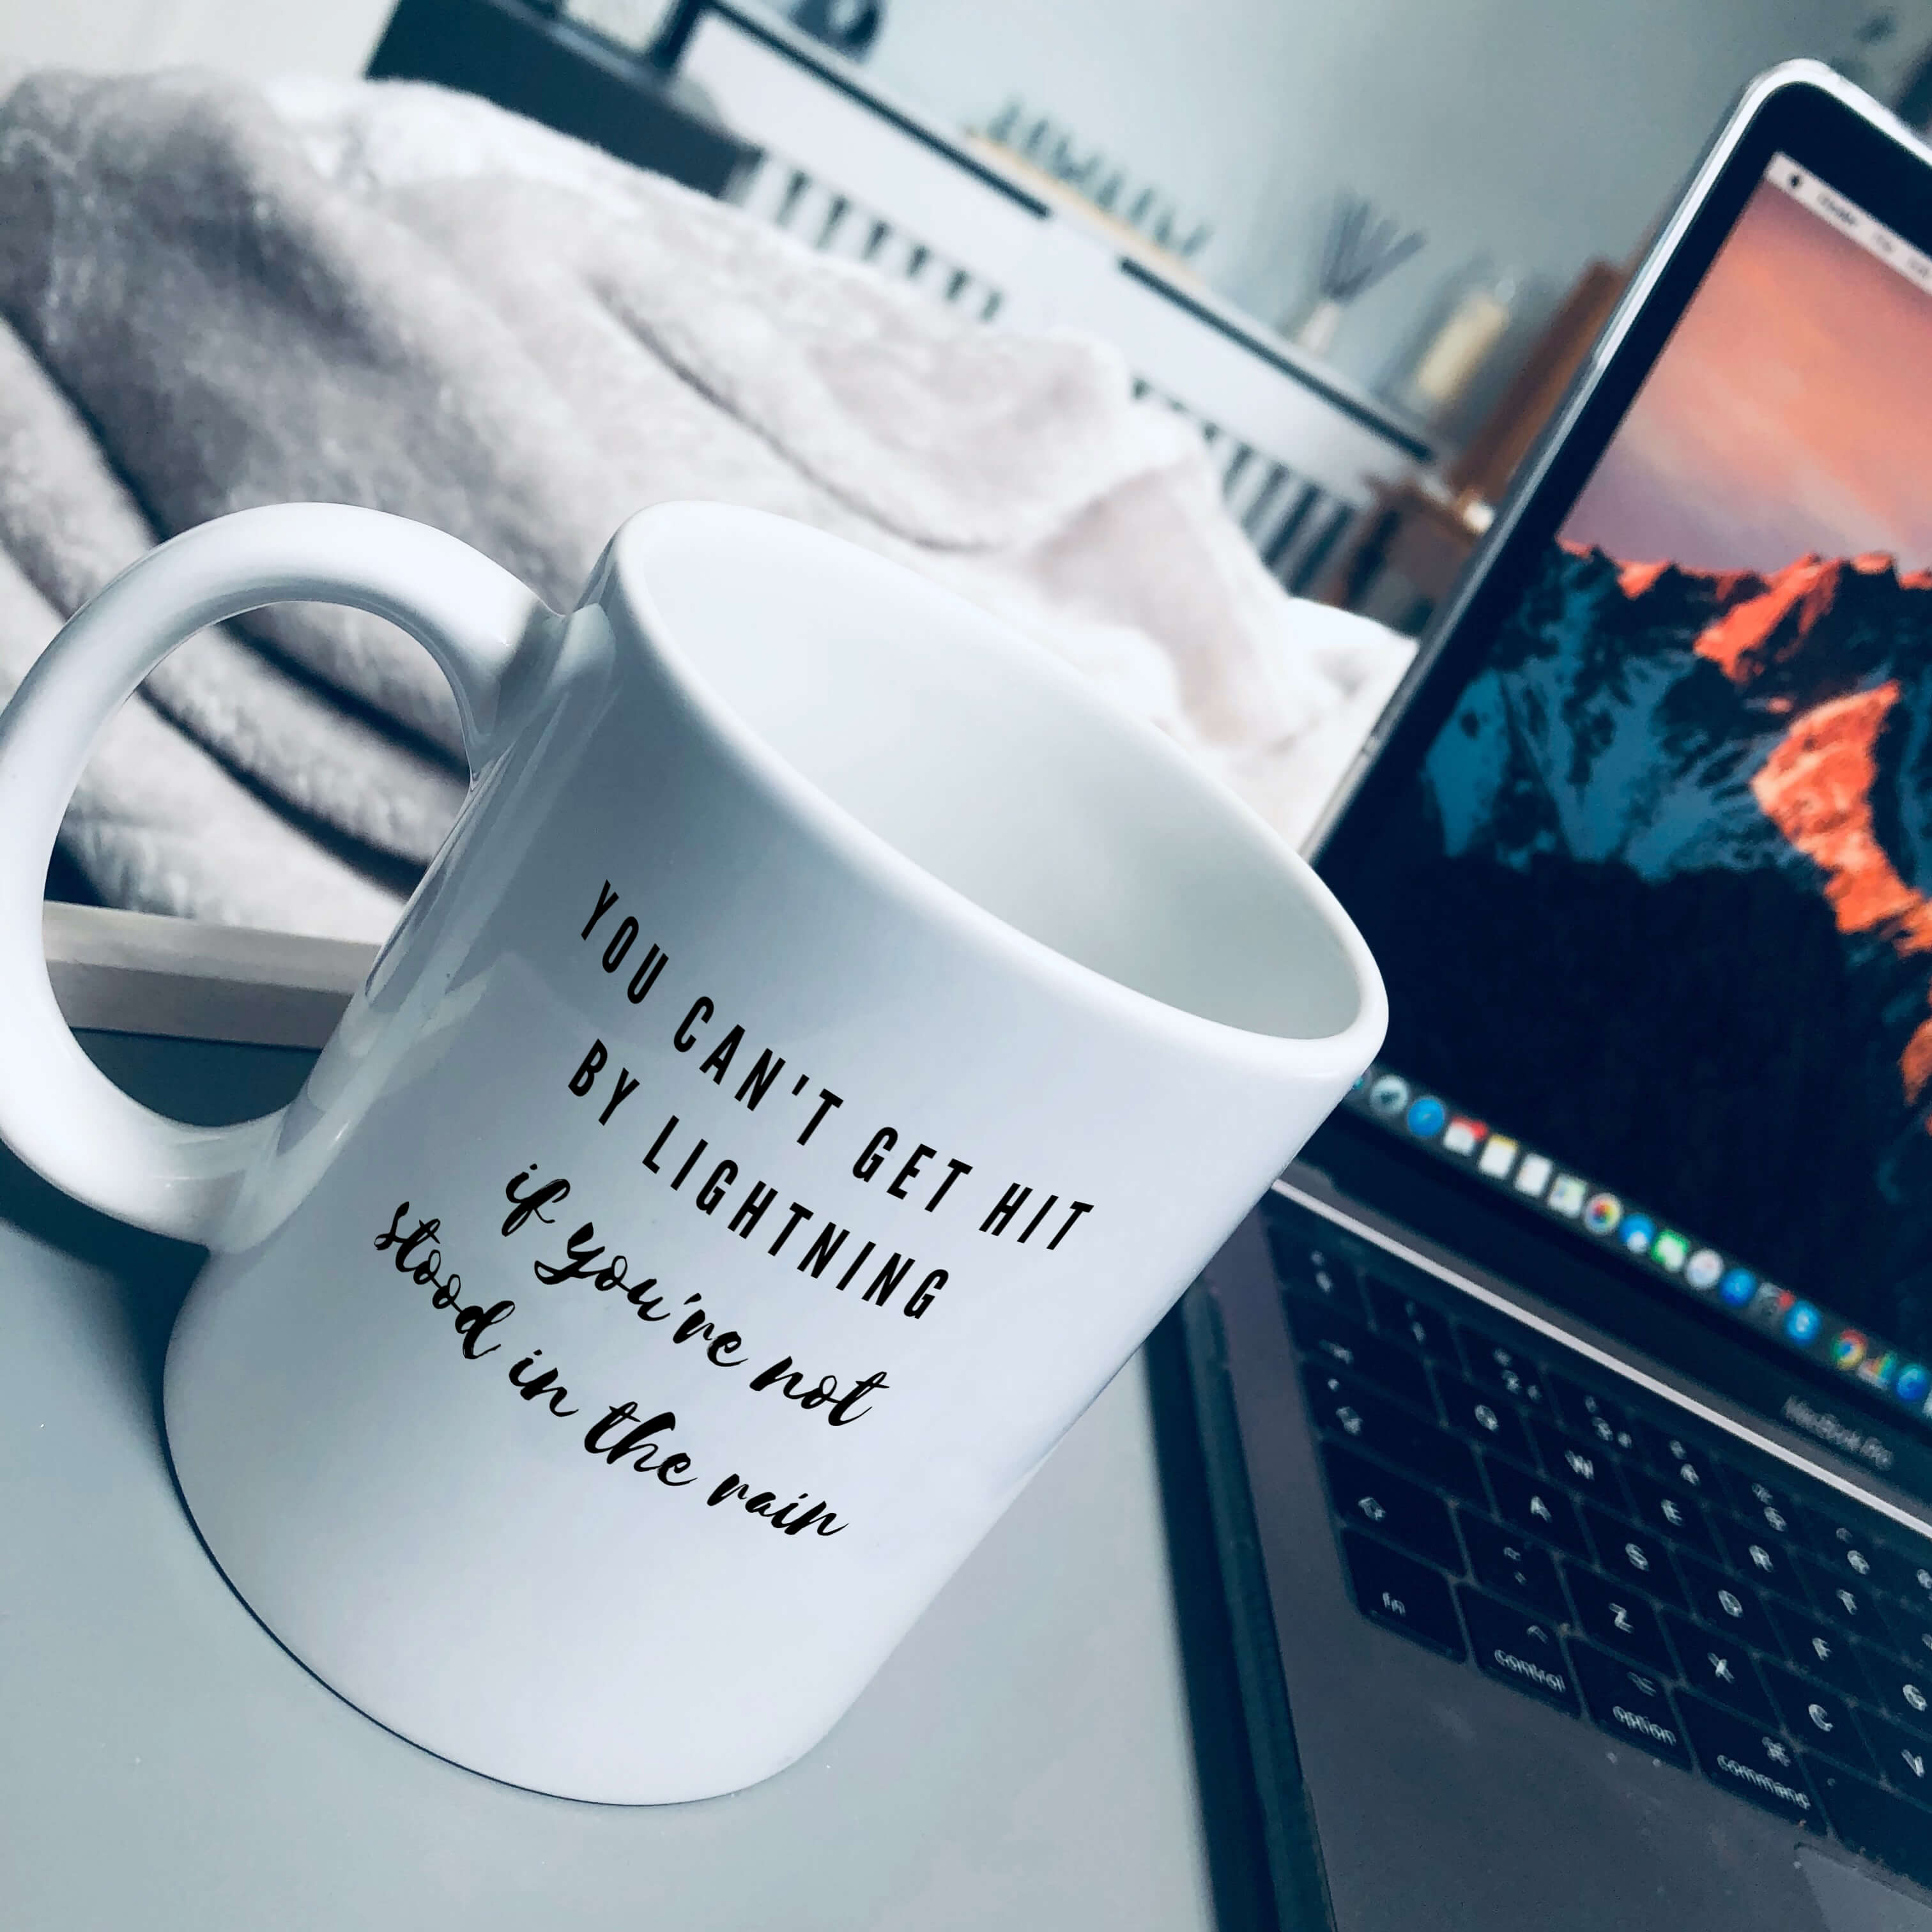 Mug that says: You can't get hit by lightning if you're not stood in the rain